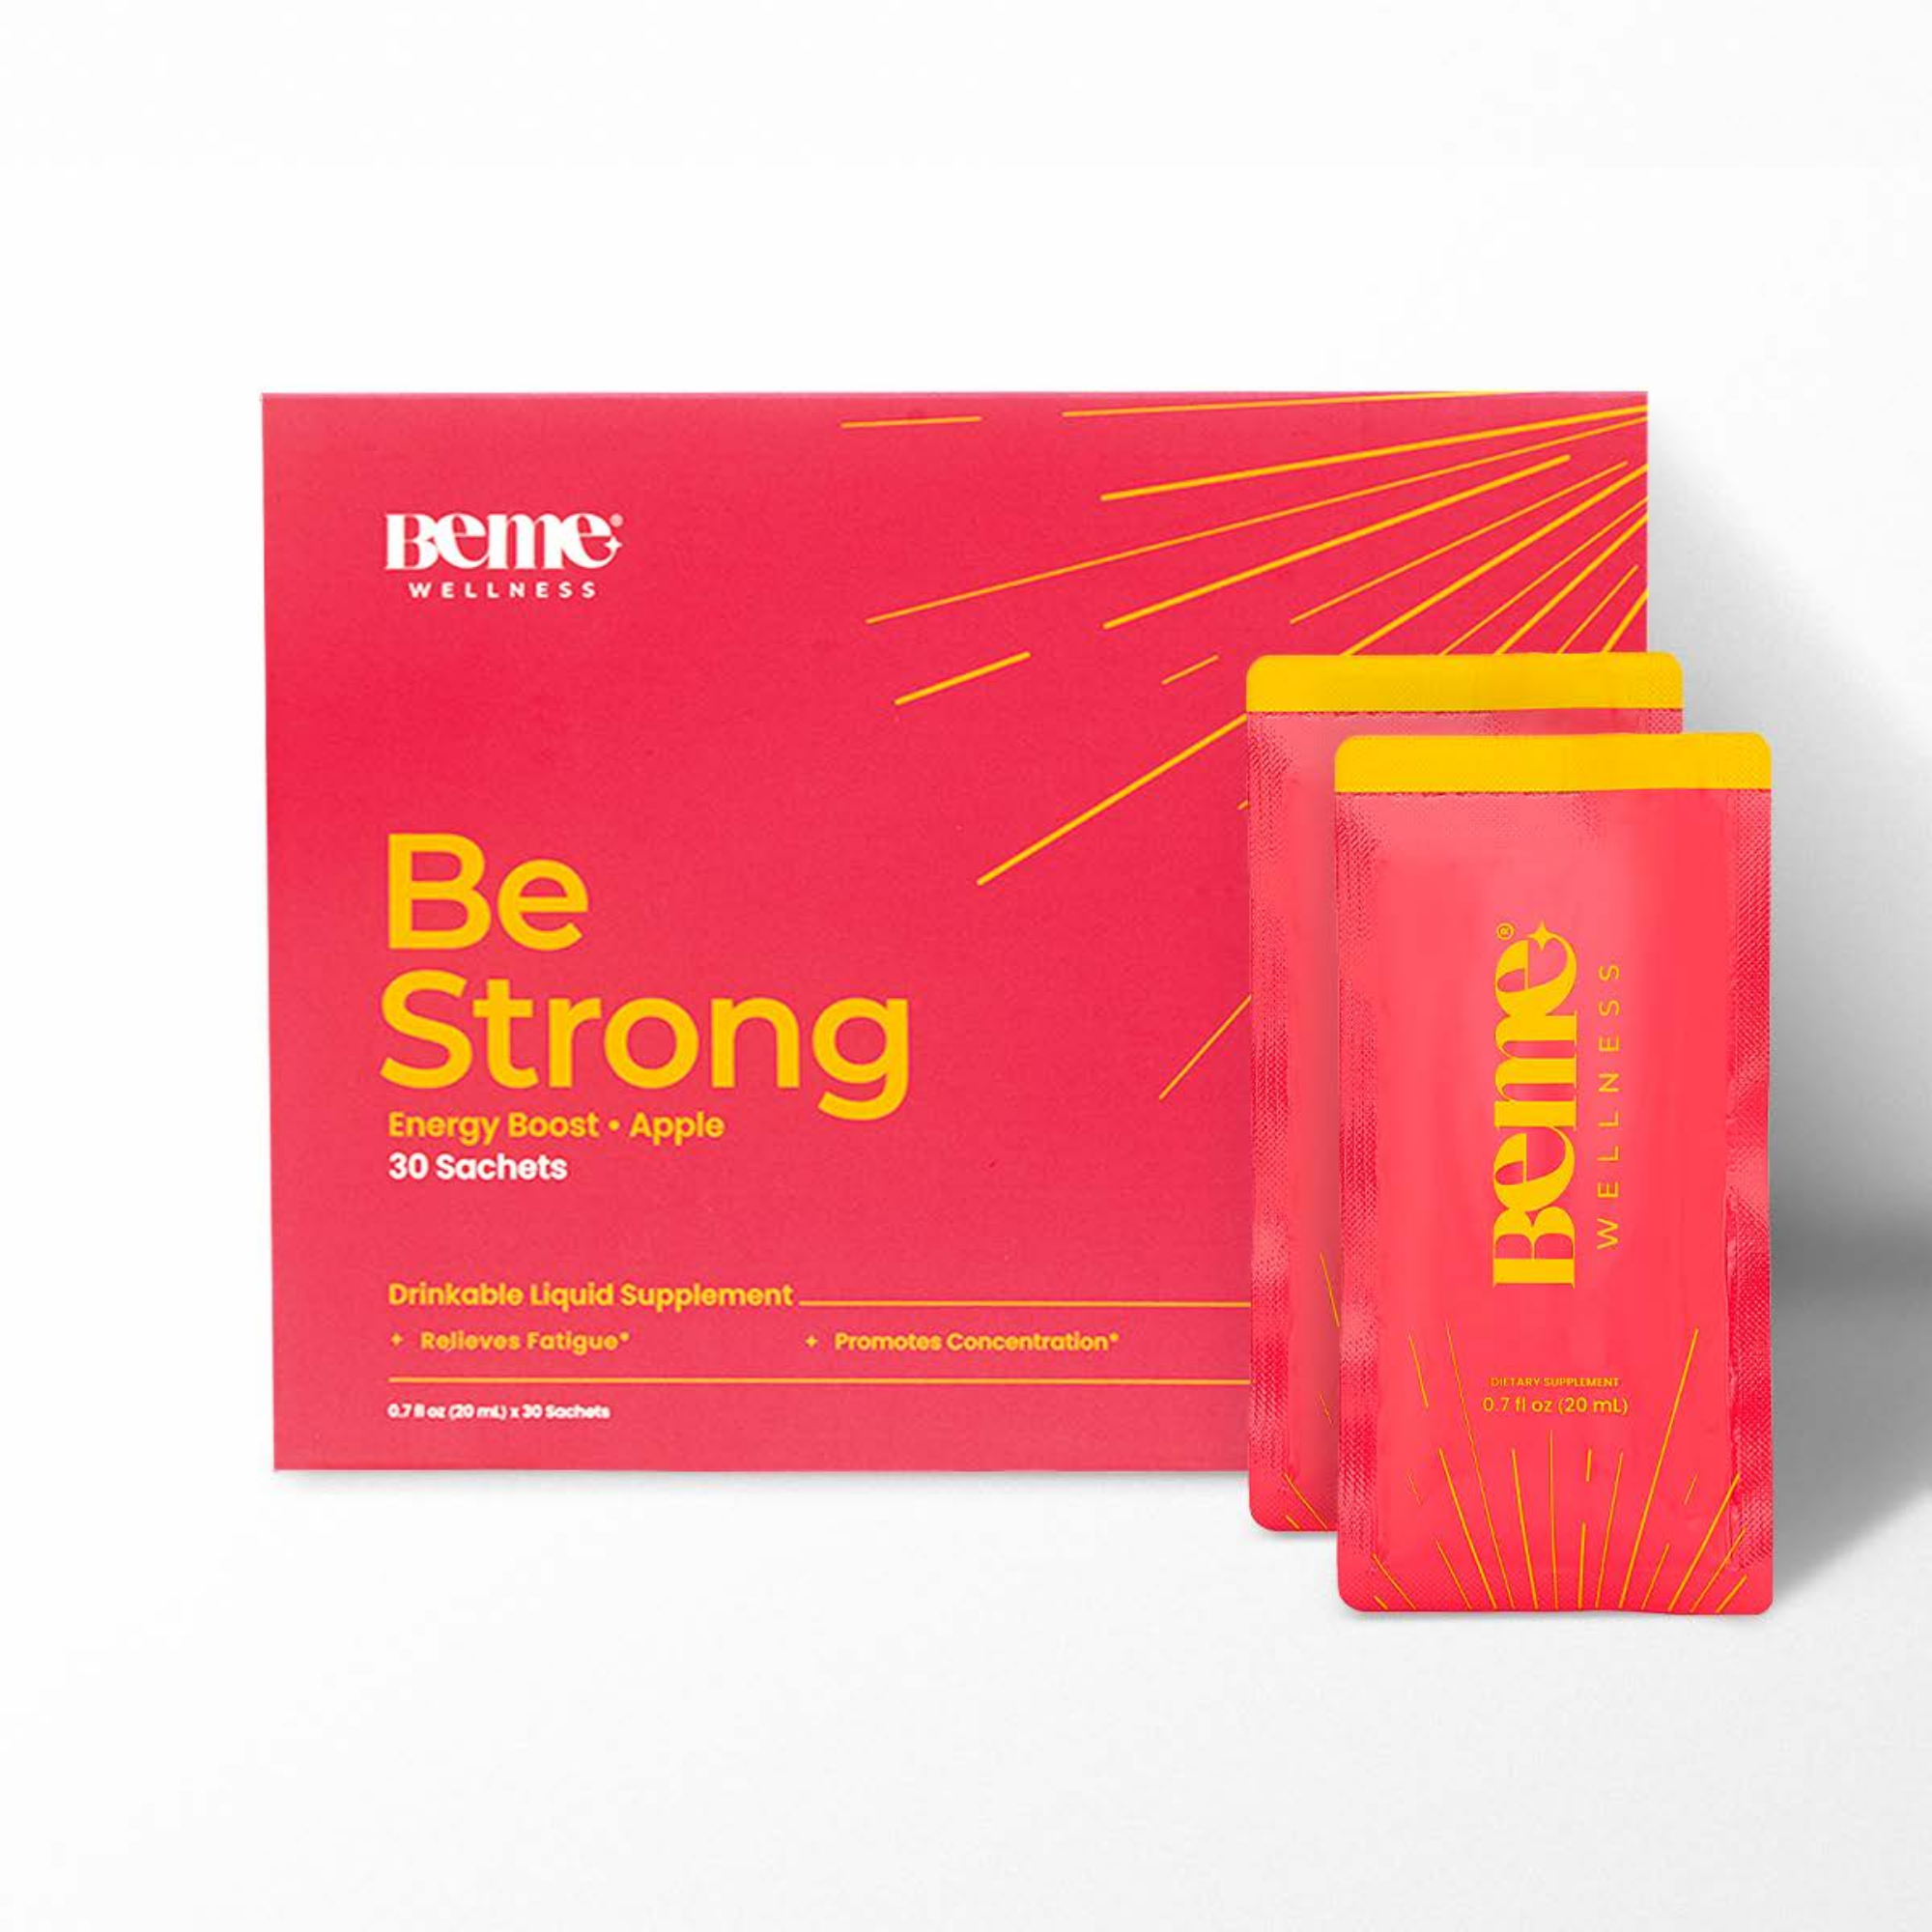 Be Strong® Energy Boost